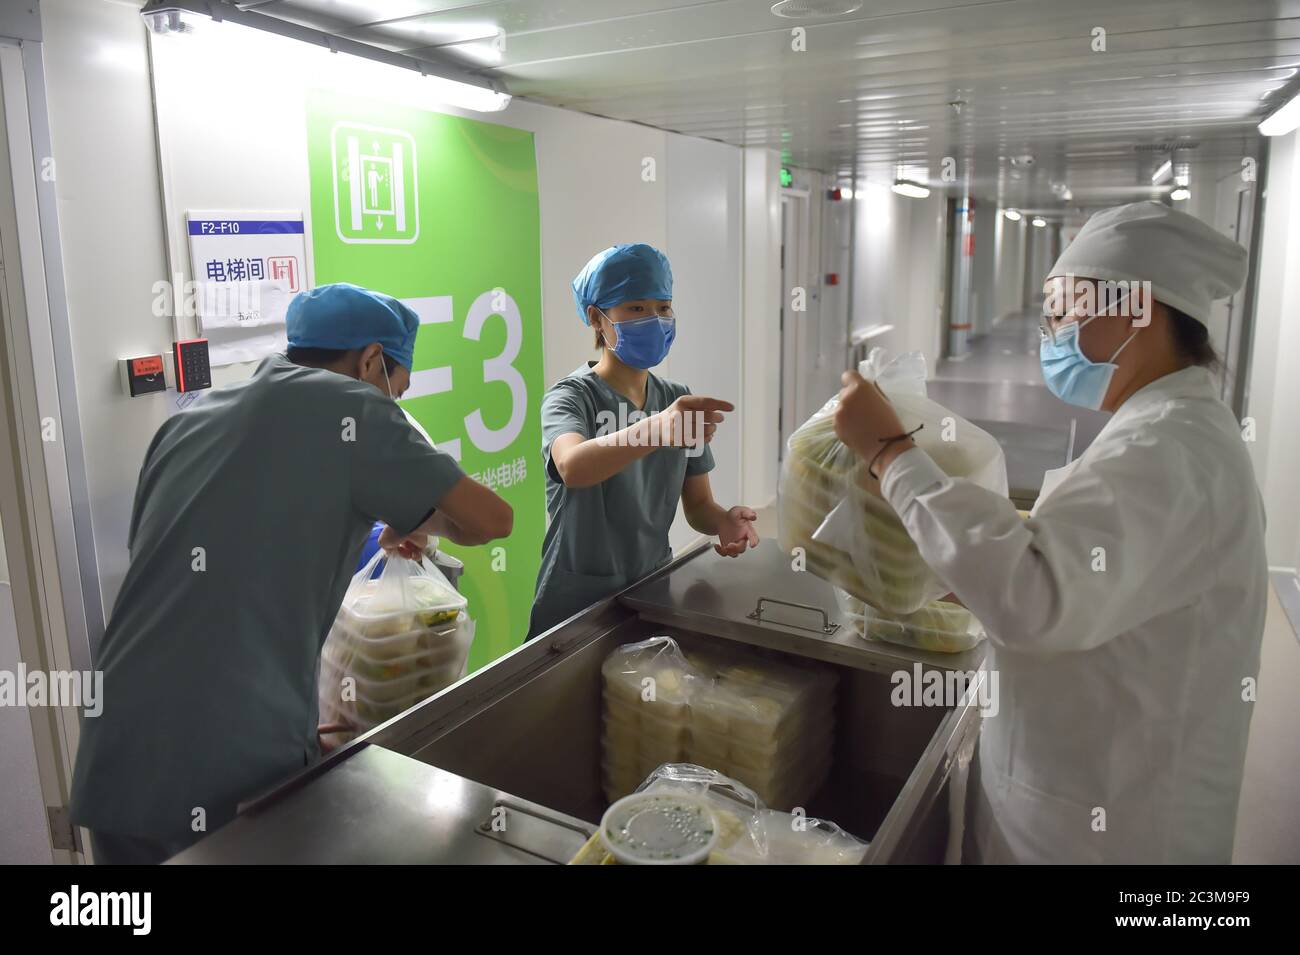 Beijing, China. 19th June, 2020. Nurses get meals for COVID-19 patients outside the isolation ward at Ditan Hospital in Beijing, capital of China, June 19, 2020. Beijing reported 227 COVID-19 cases on June 11-20. Credit: Peng Ziyang/Xinhua/Alamy Live News Stock Photo